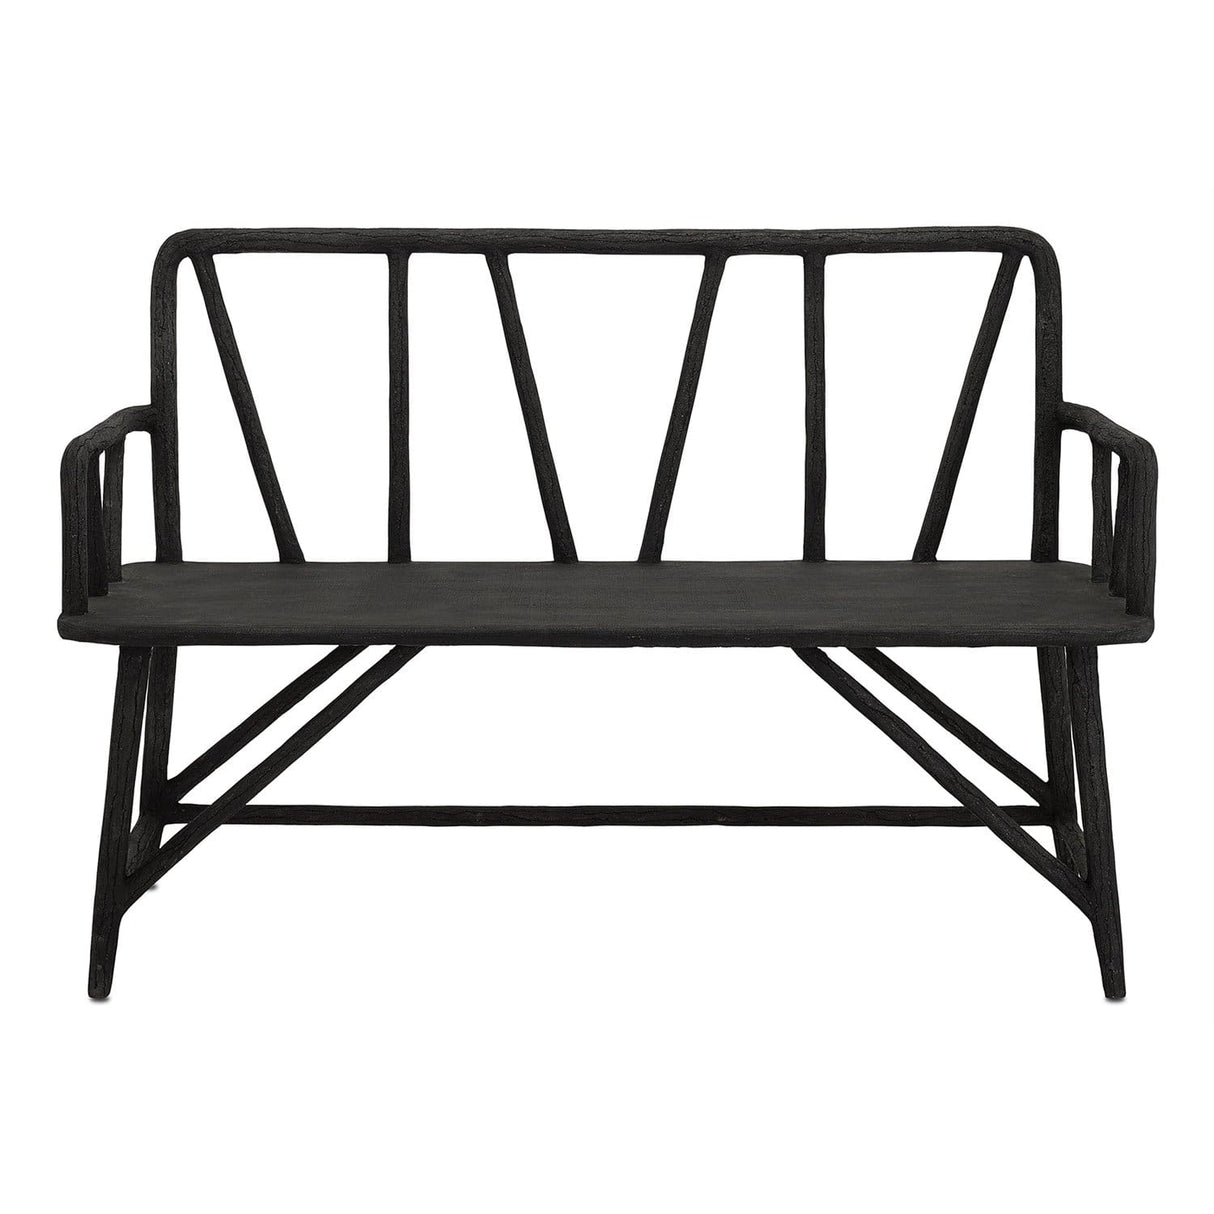 Currey and Company Arboria Bench Furniture currey-co-2000-0003